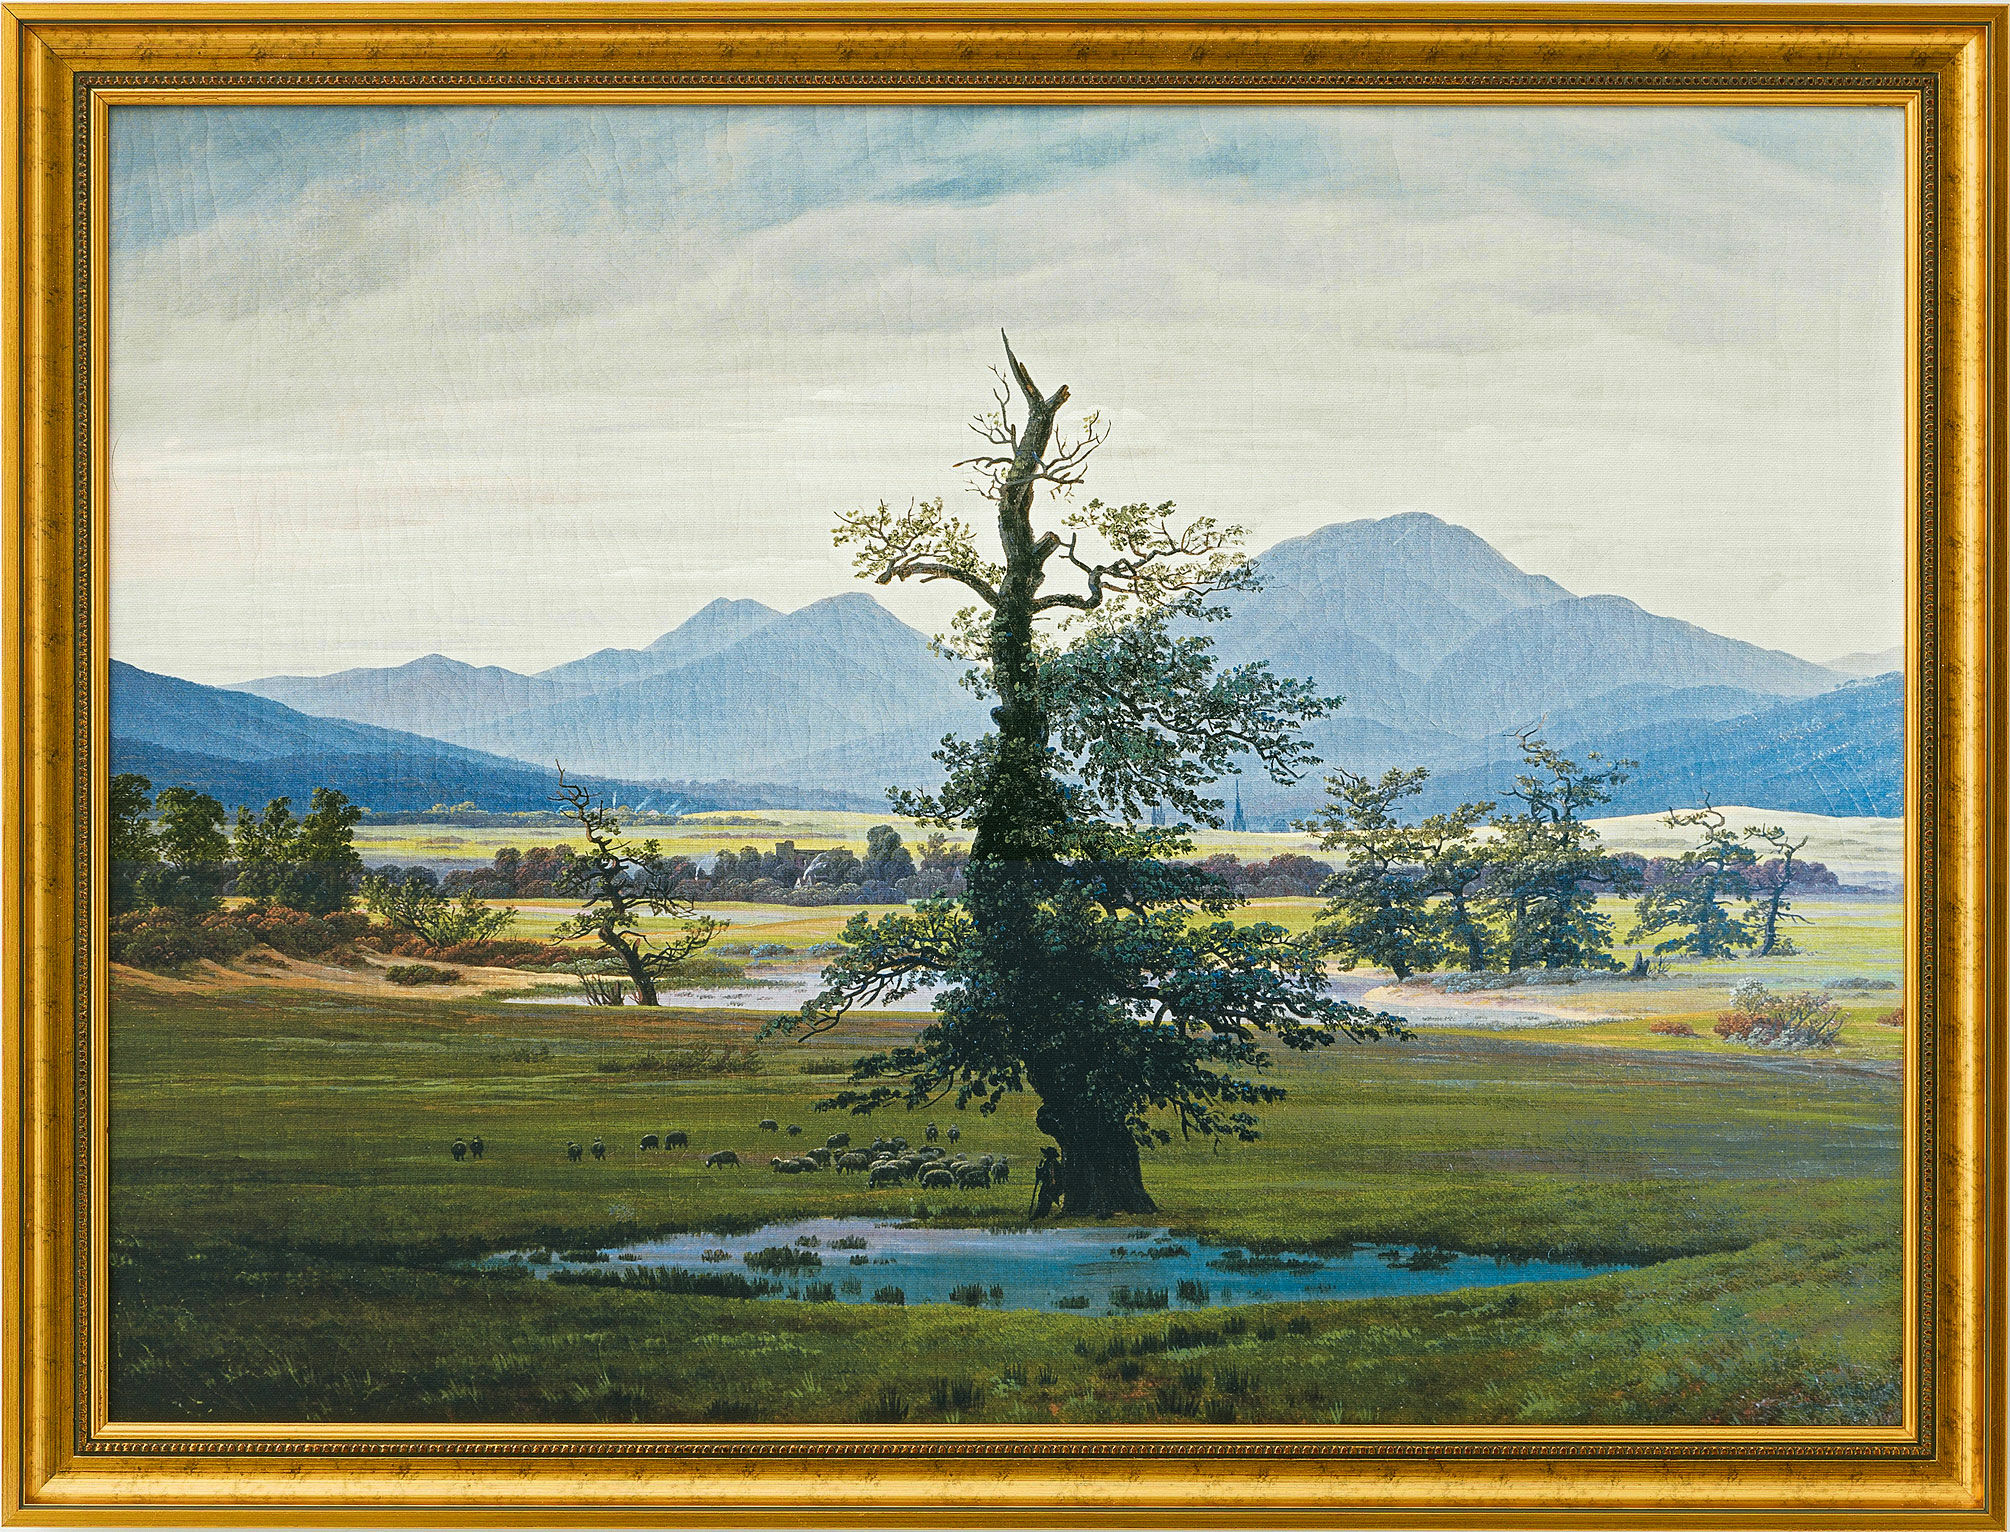 Picture "The Lonely Tree" (1822), framed by Caspar David Friedrich